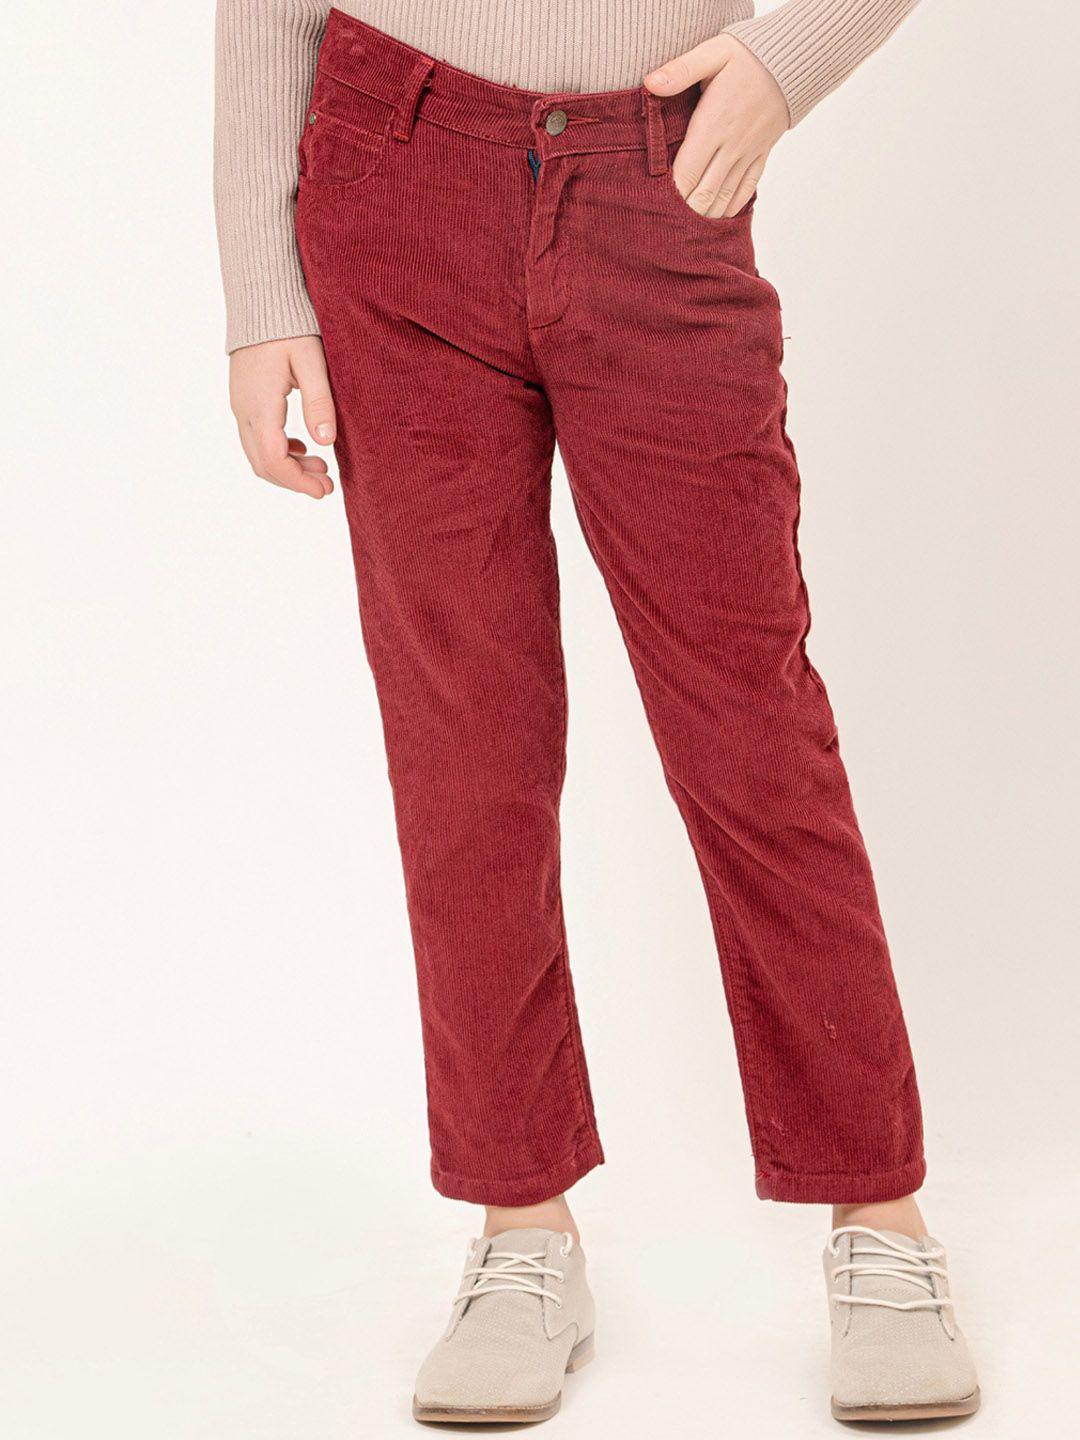 one friday boys mid rise clean look cotton jeans